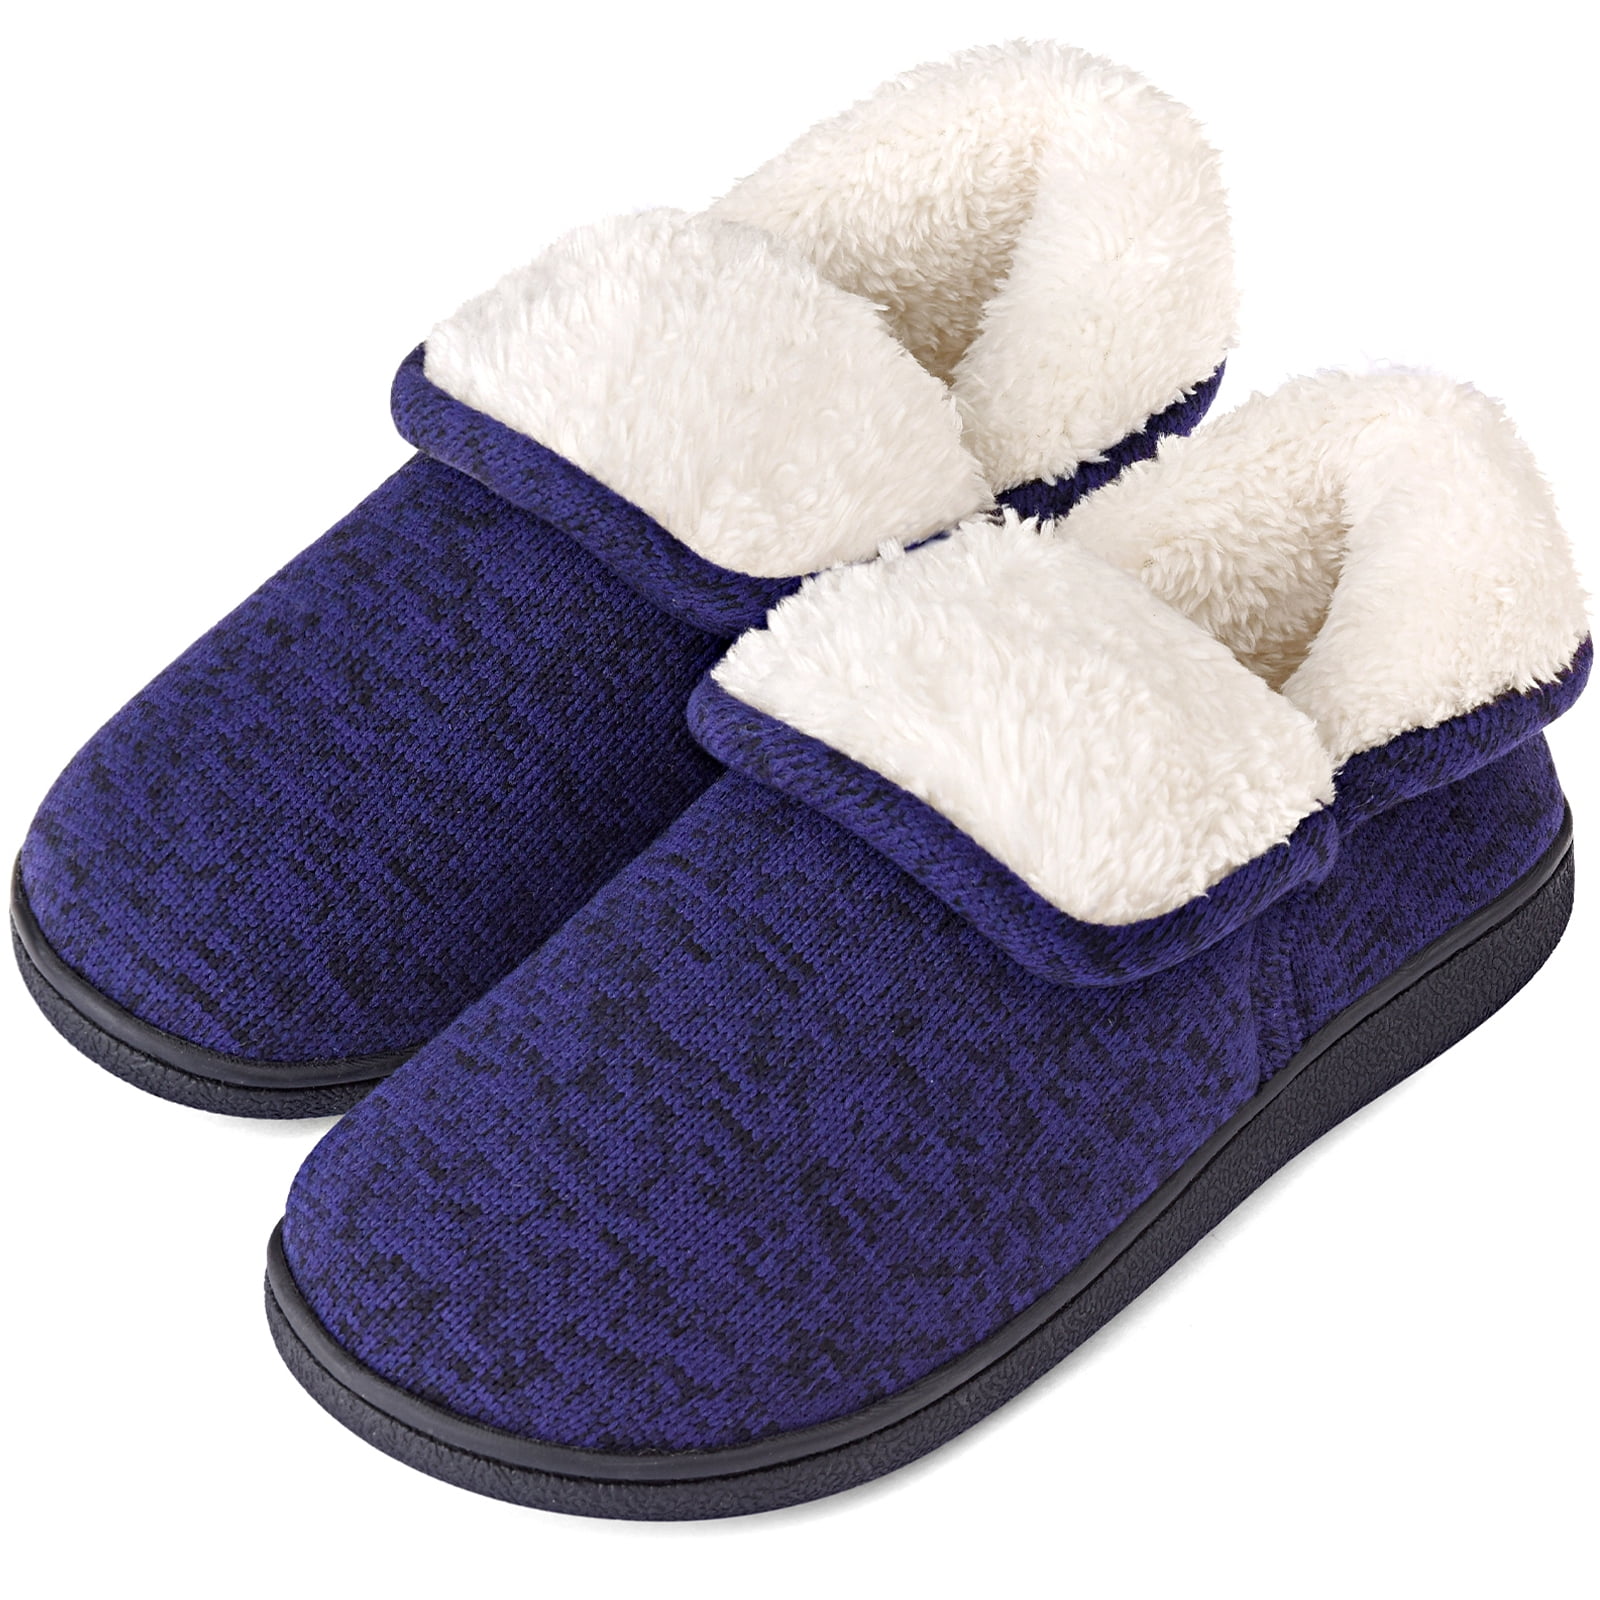 Ladie's Men's Very Warm Fleece Sheep Wool Boots Slippers All Sizes & Models 